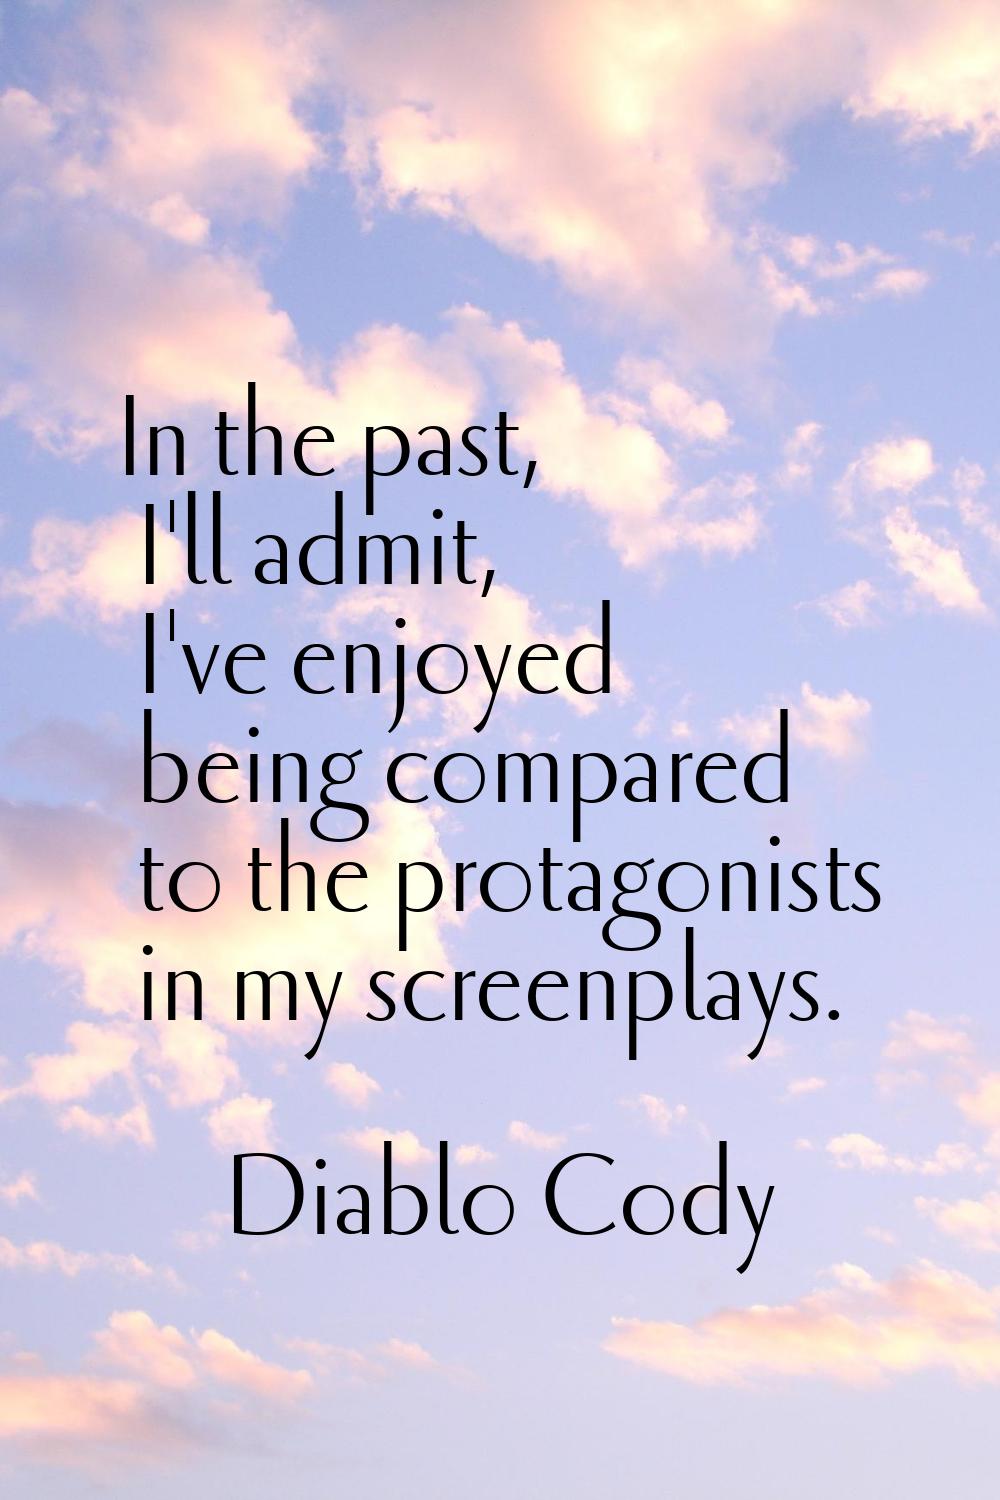 In the past, I'll admit, I've enjoyed being compared to the protagonists in my screenplays.